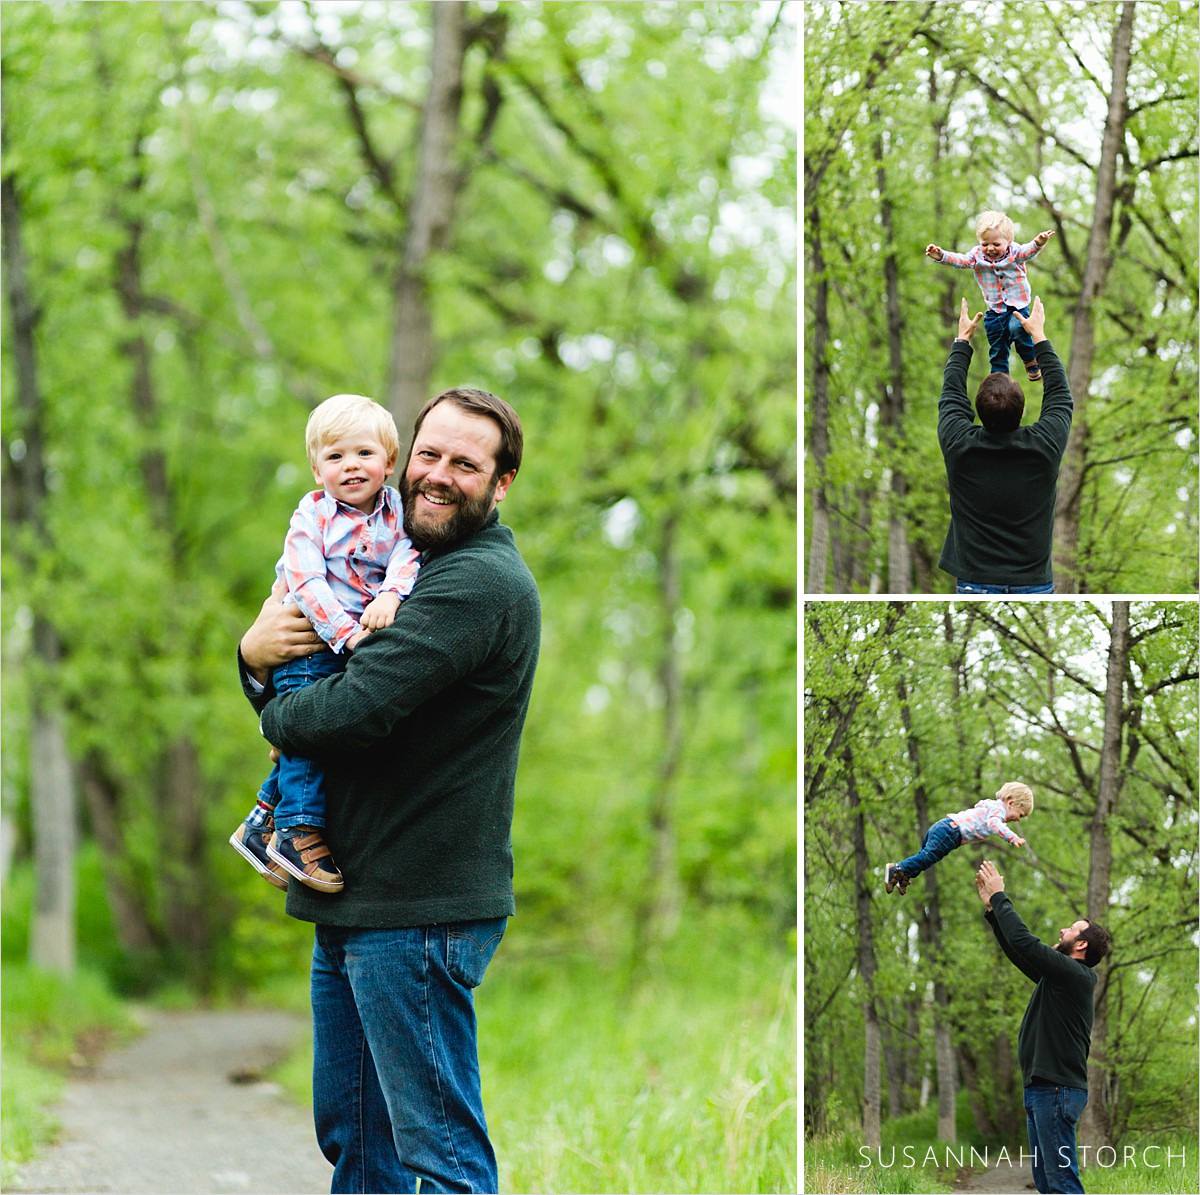 three images of a dad holding his son during an outdoor photo session